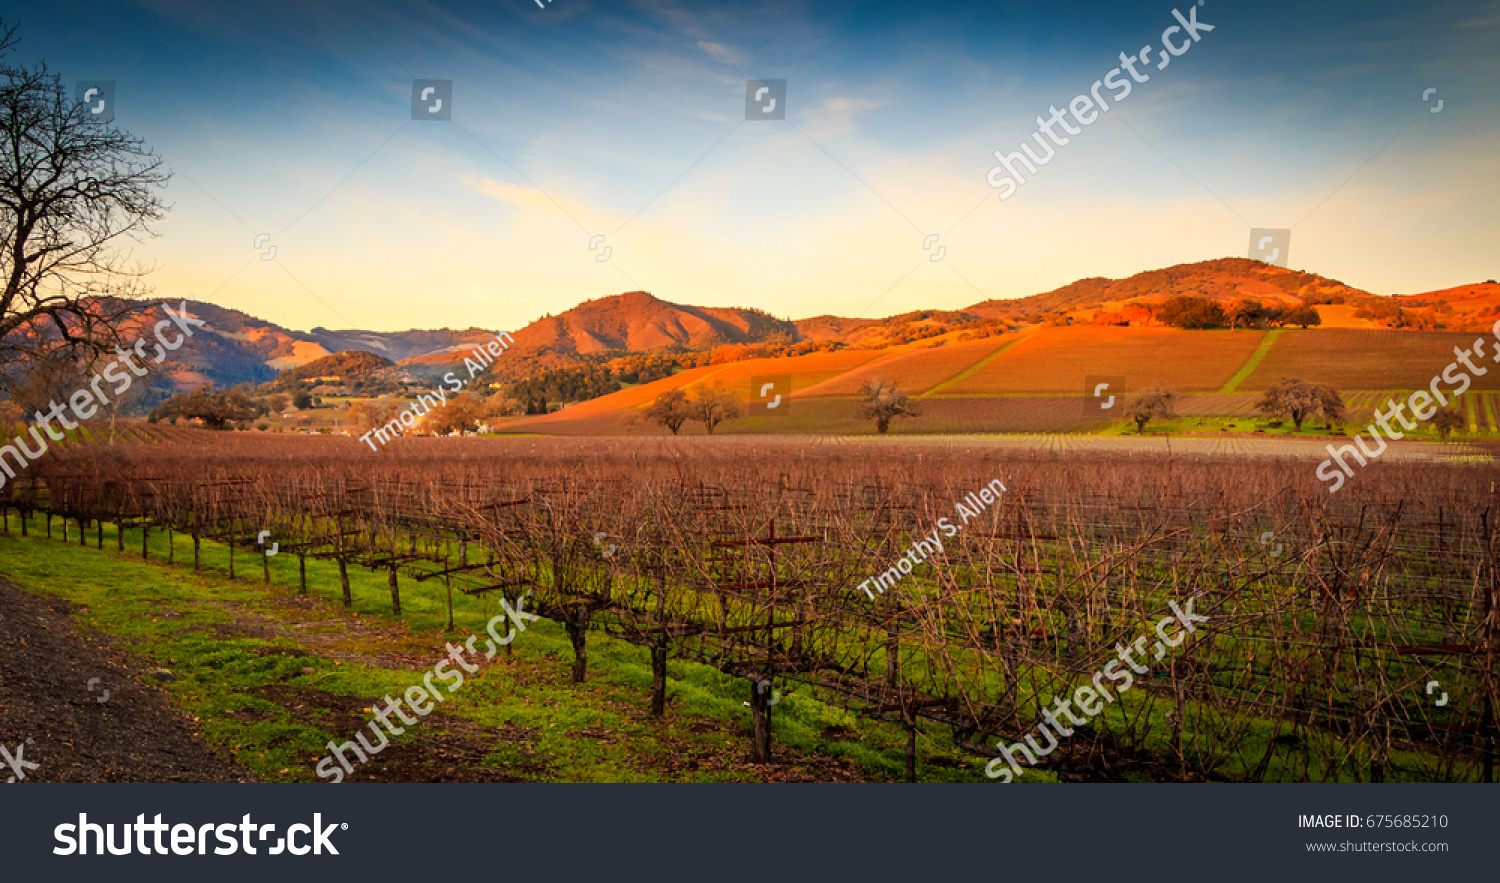 A landscape view of Sonoma valley vineyards at sunset with fluffy white clouds, trees and buildings. #675685210